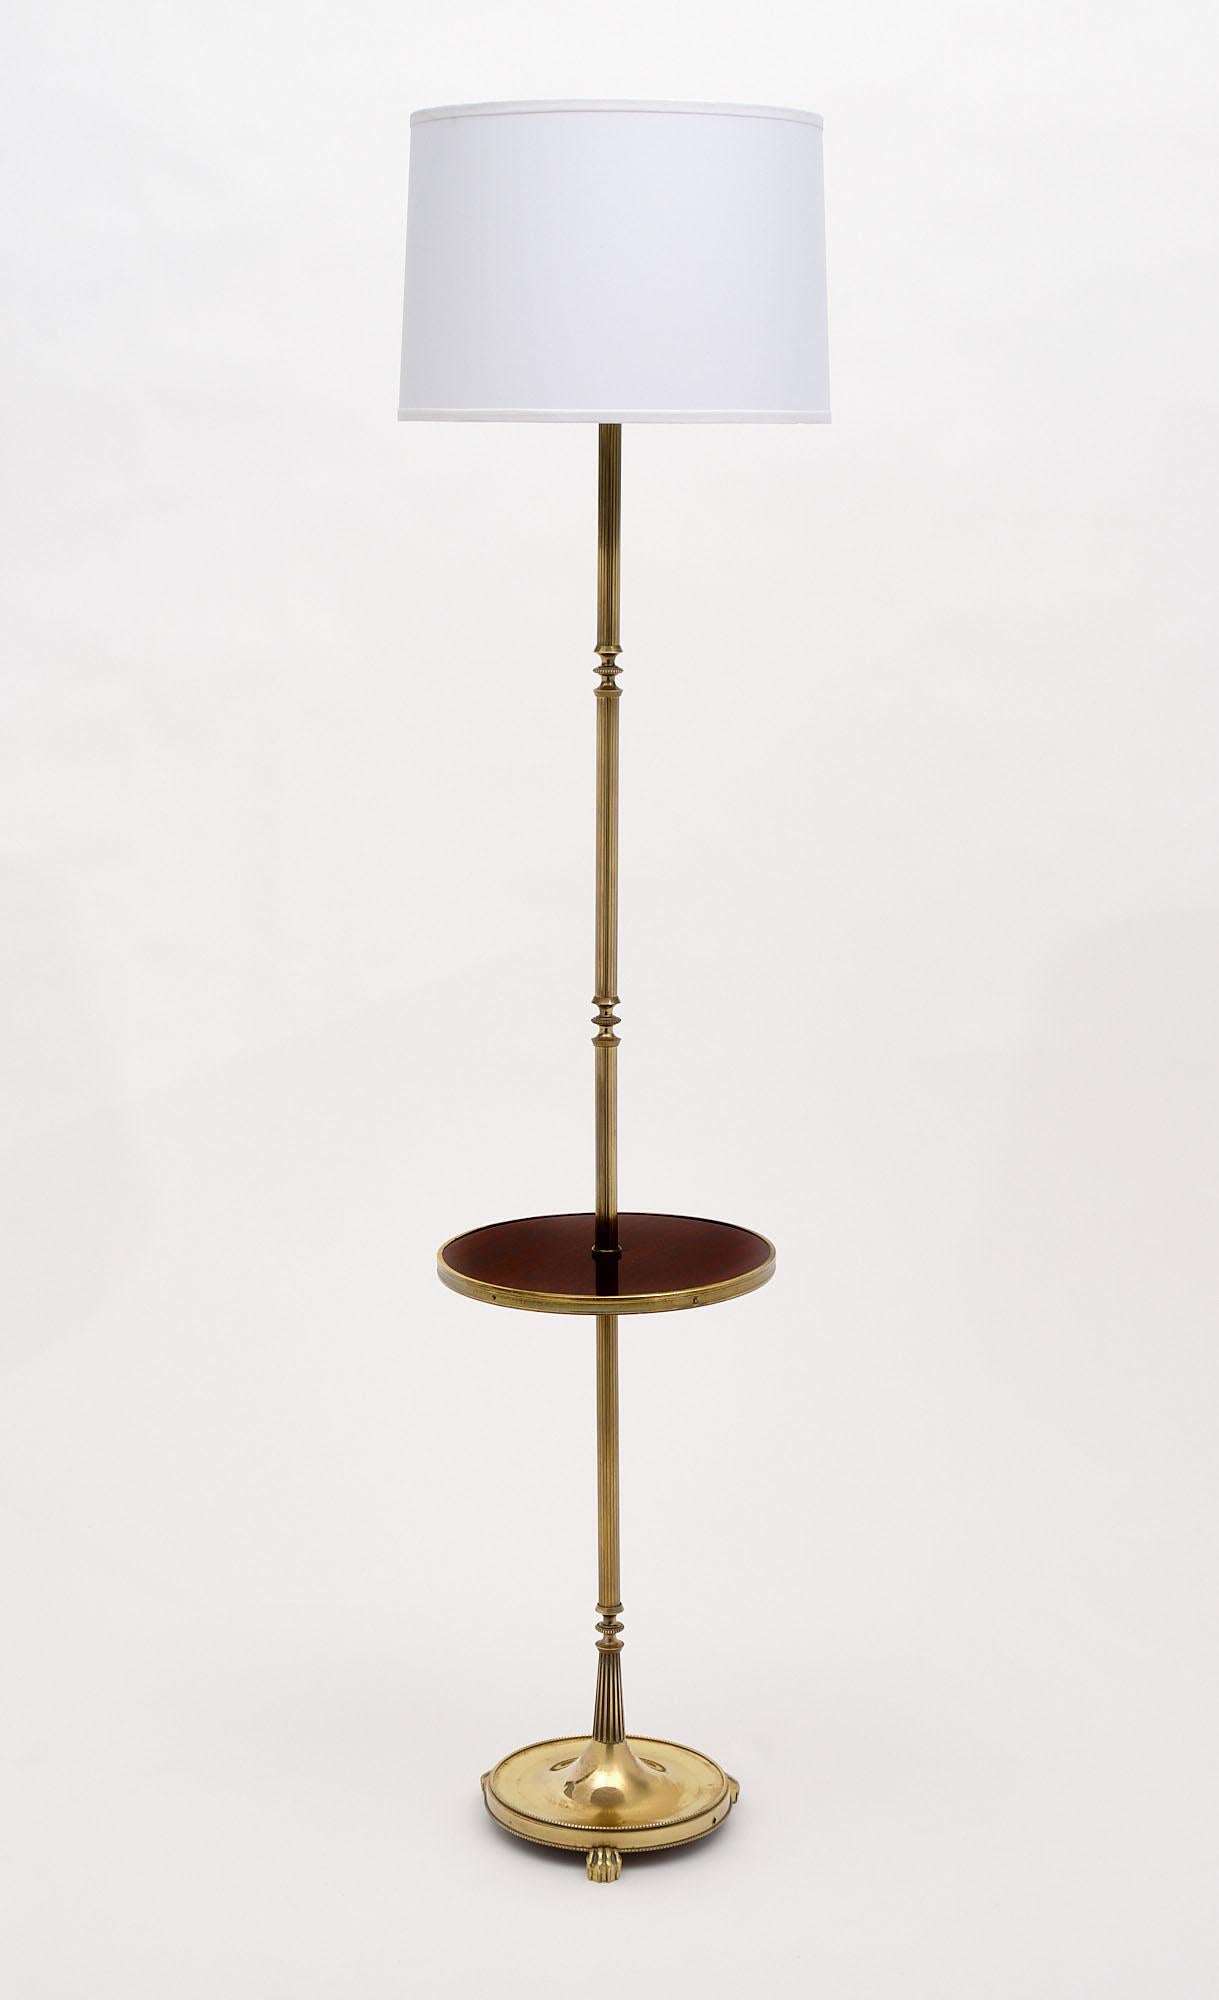 Floor lamp from France by Maison Jansen. This piece is made of polished brass with a tripod base and a spheric rosewood shelf in the center. The fixture comes with a new white silk-blend shade. It has been newly sired to US standards.